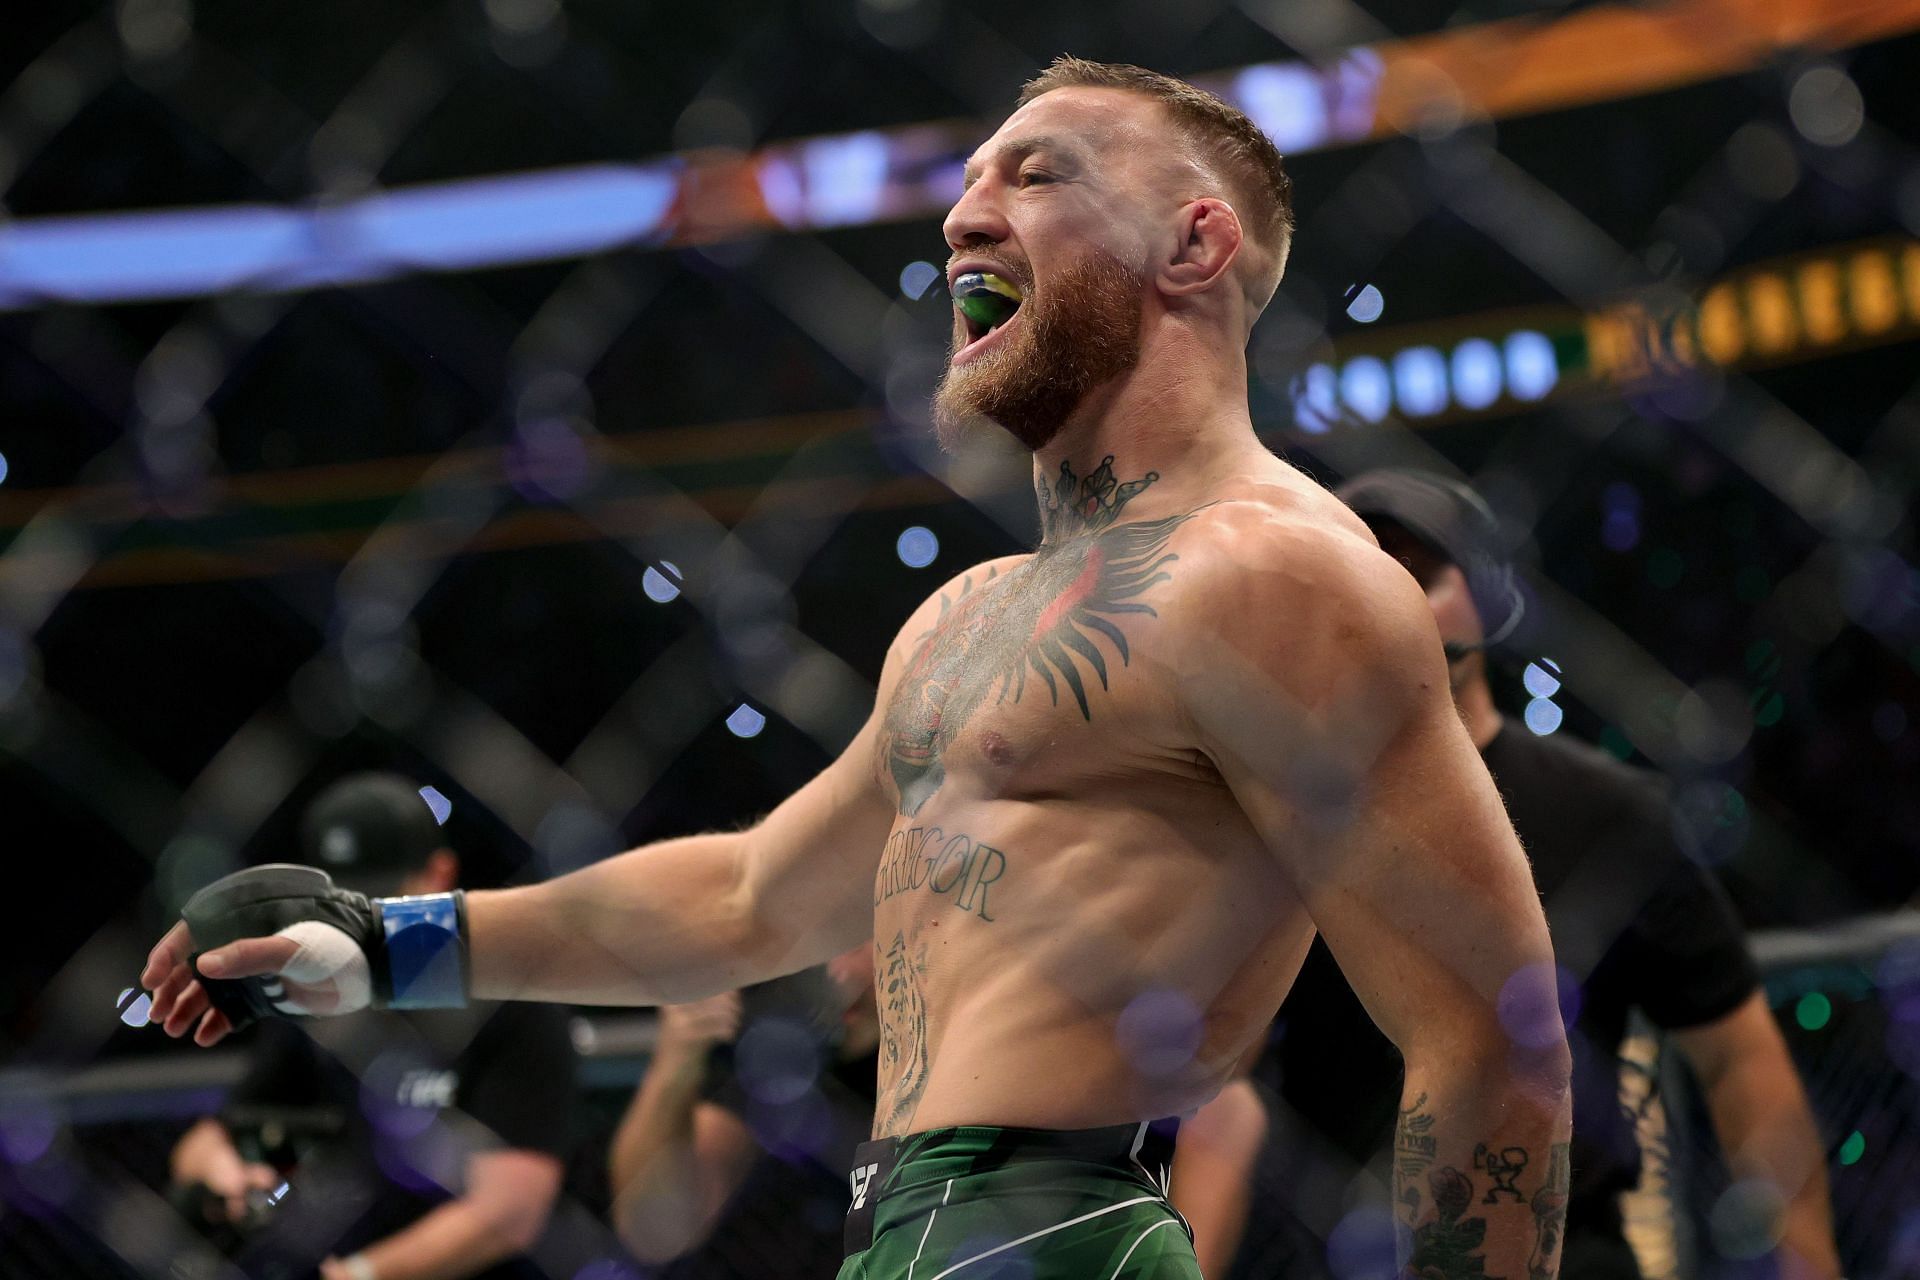 Conor McGregor has done nothing to warrant a UFC welterweight title shot